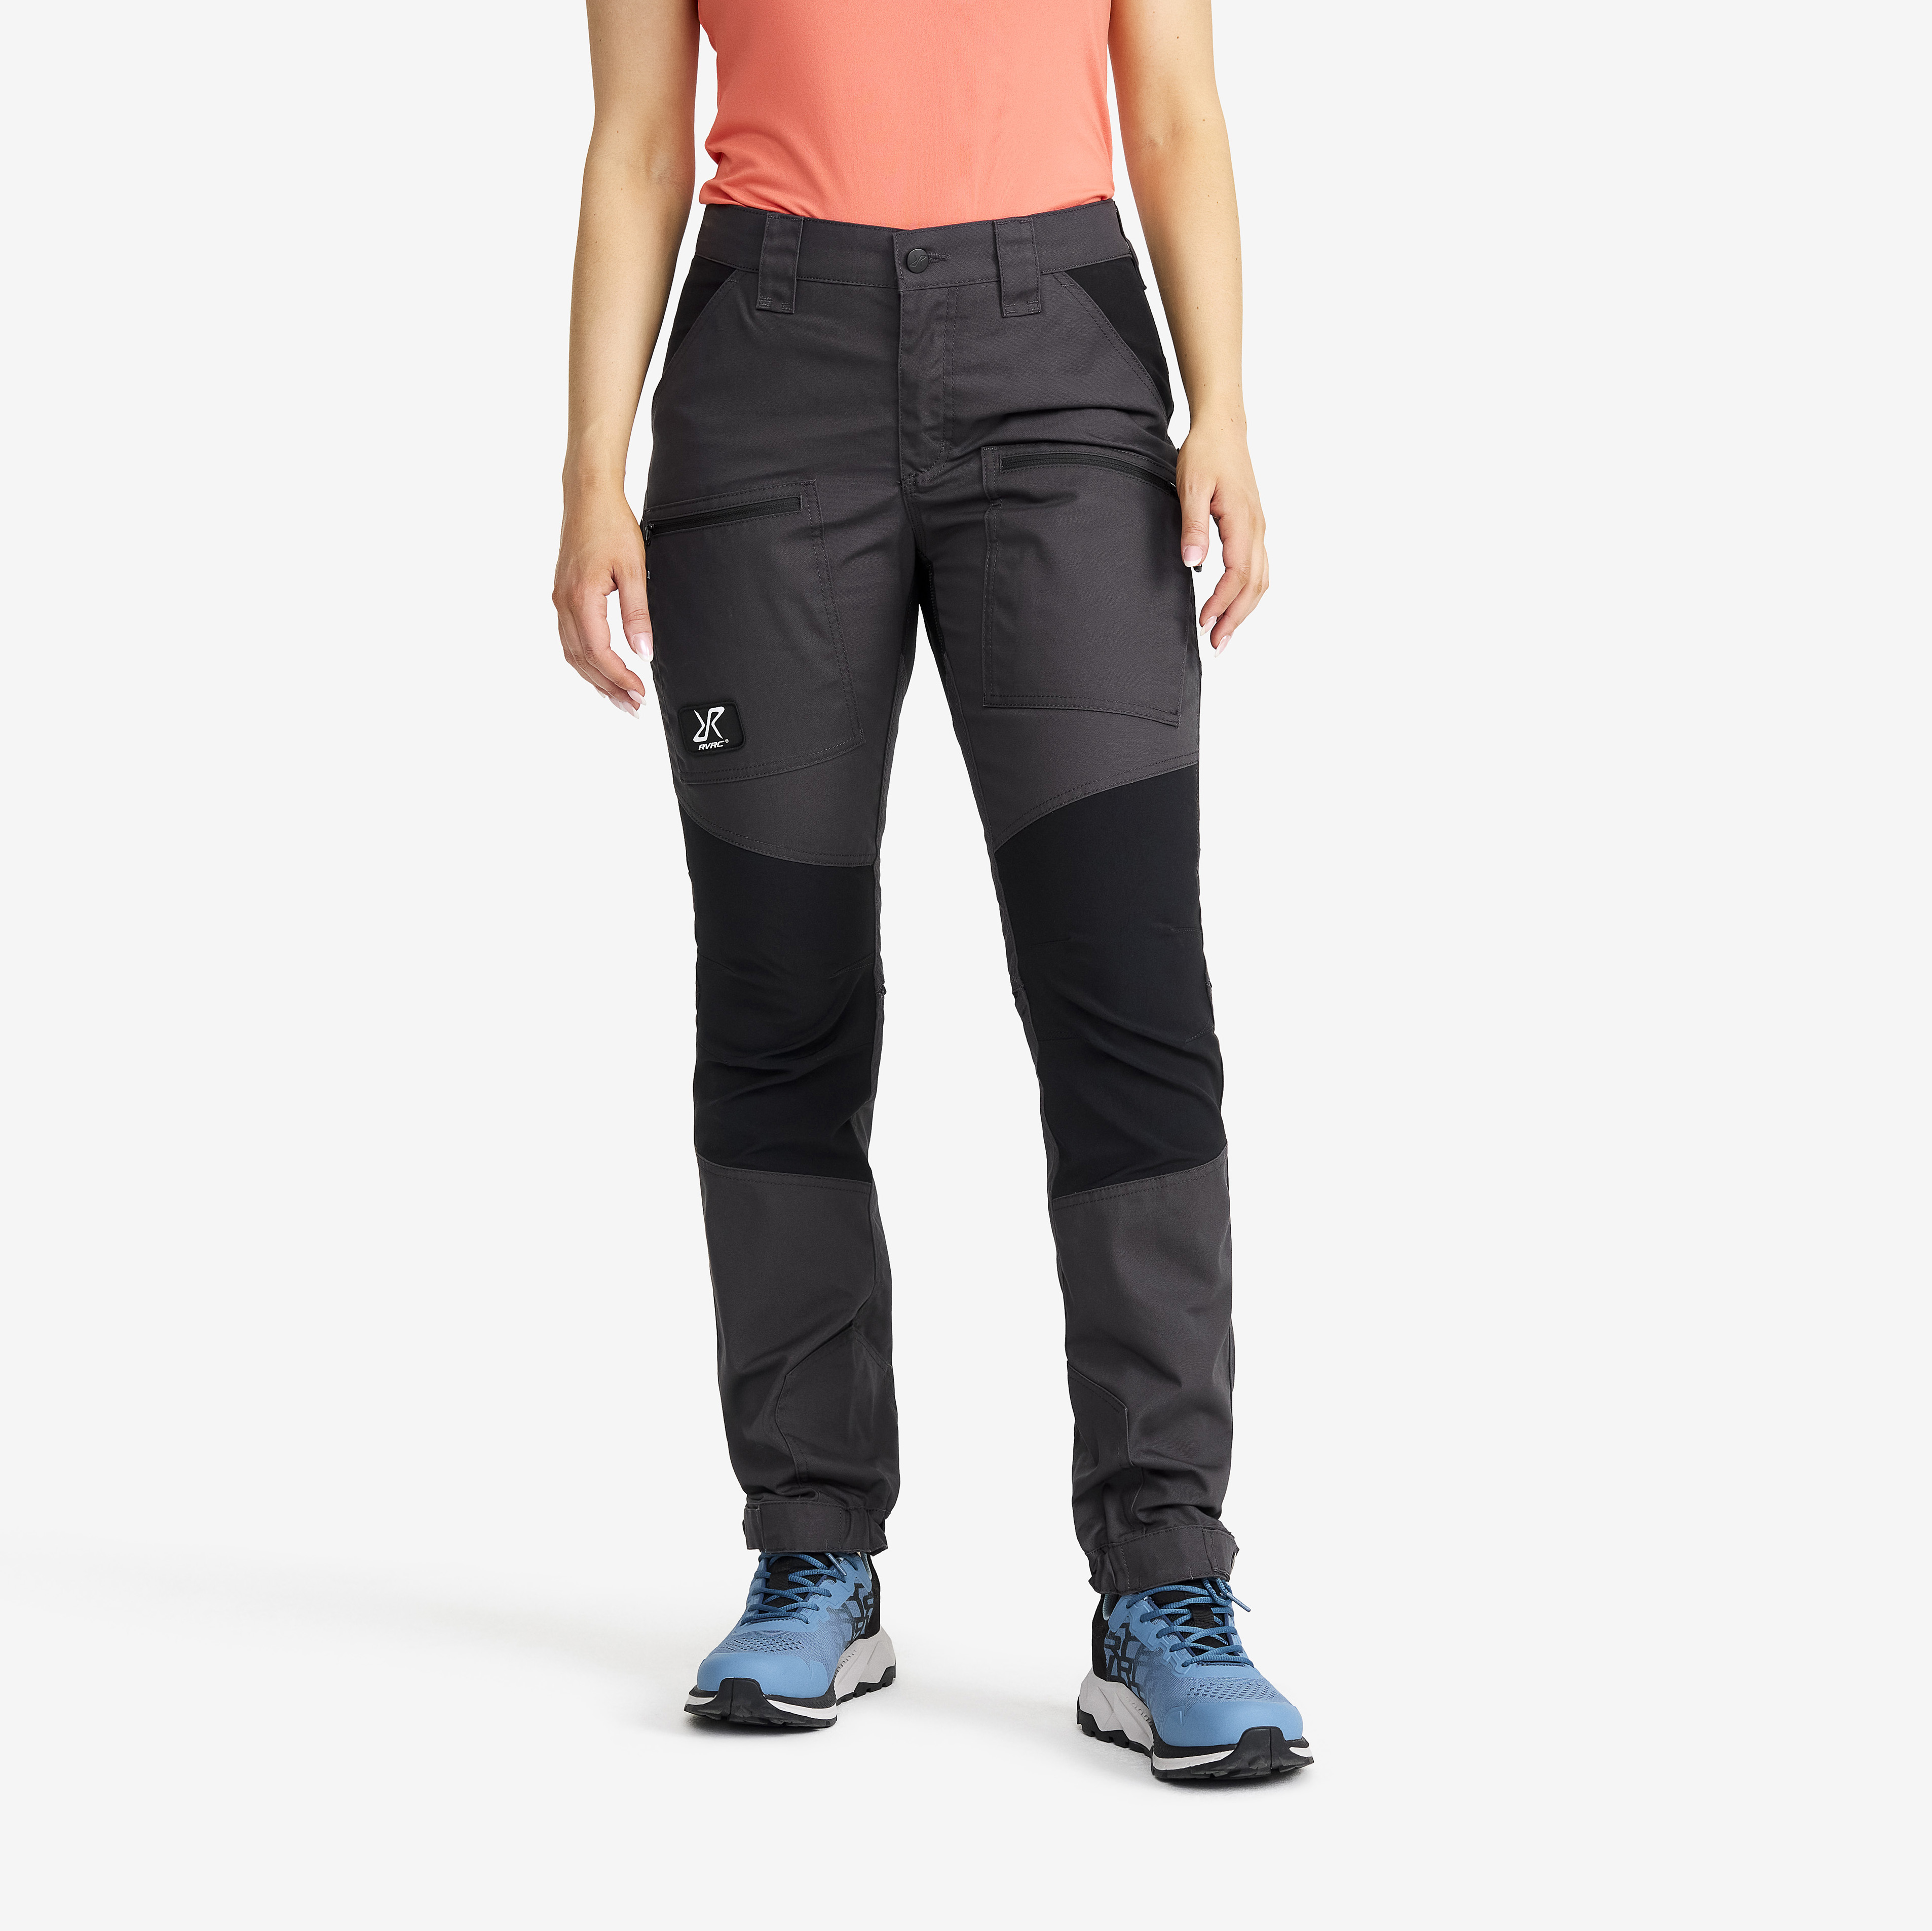 Nordwand Pro hiking trousers for women in dark grey